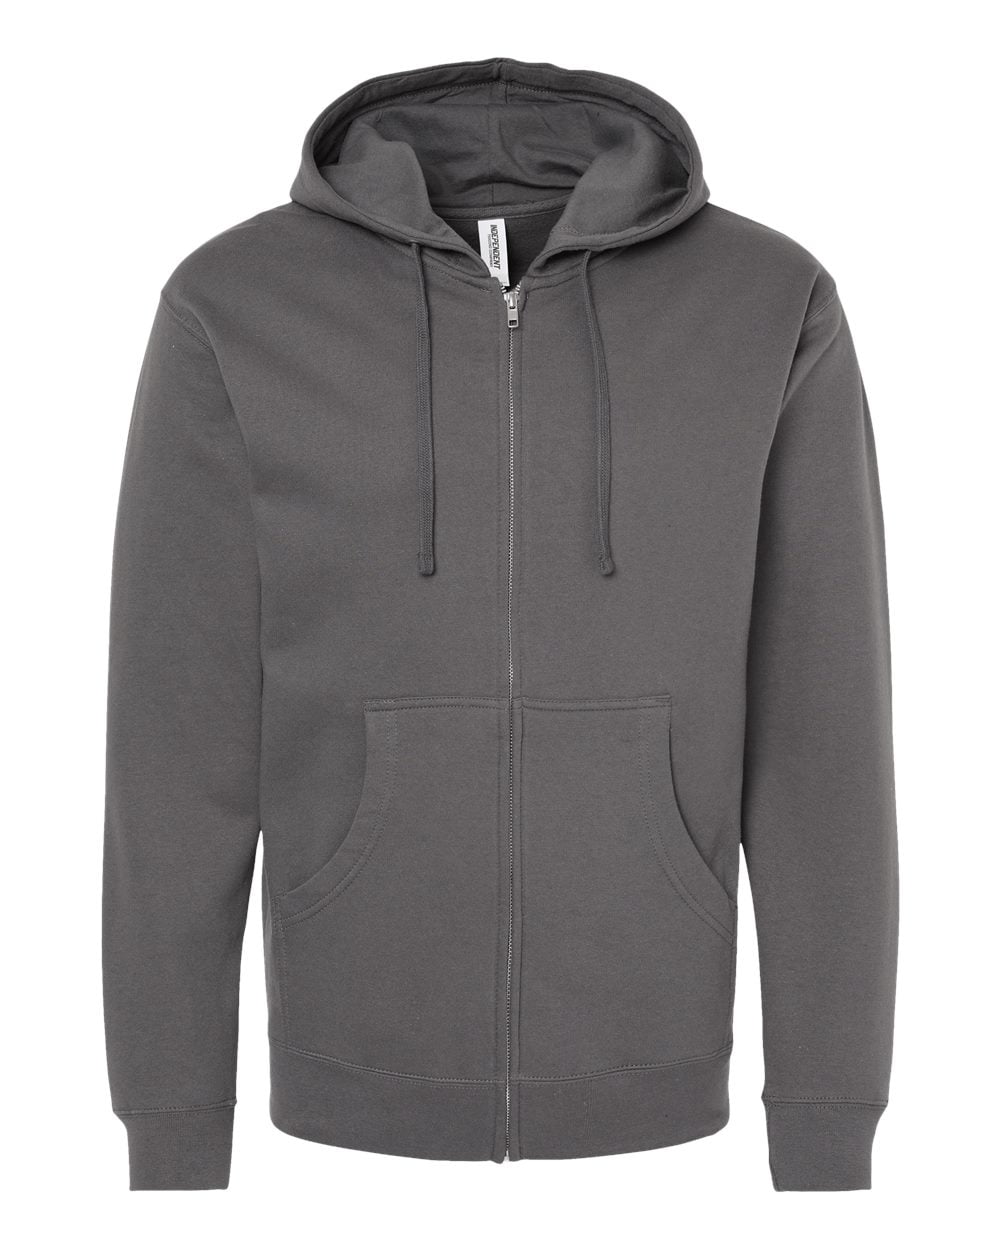 Independent Trading Co. Midweight Full-Zip Hooded Sweatshirt Size up to ...